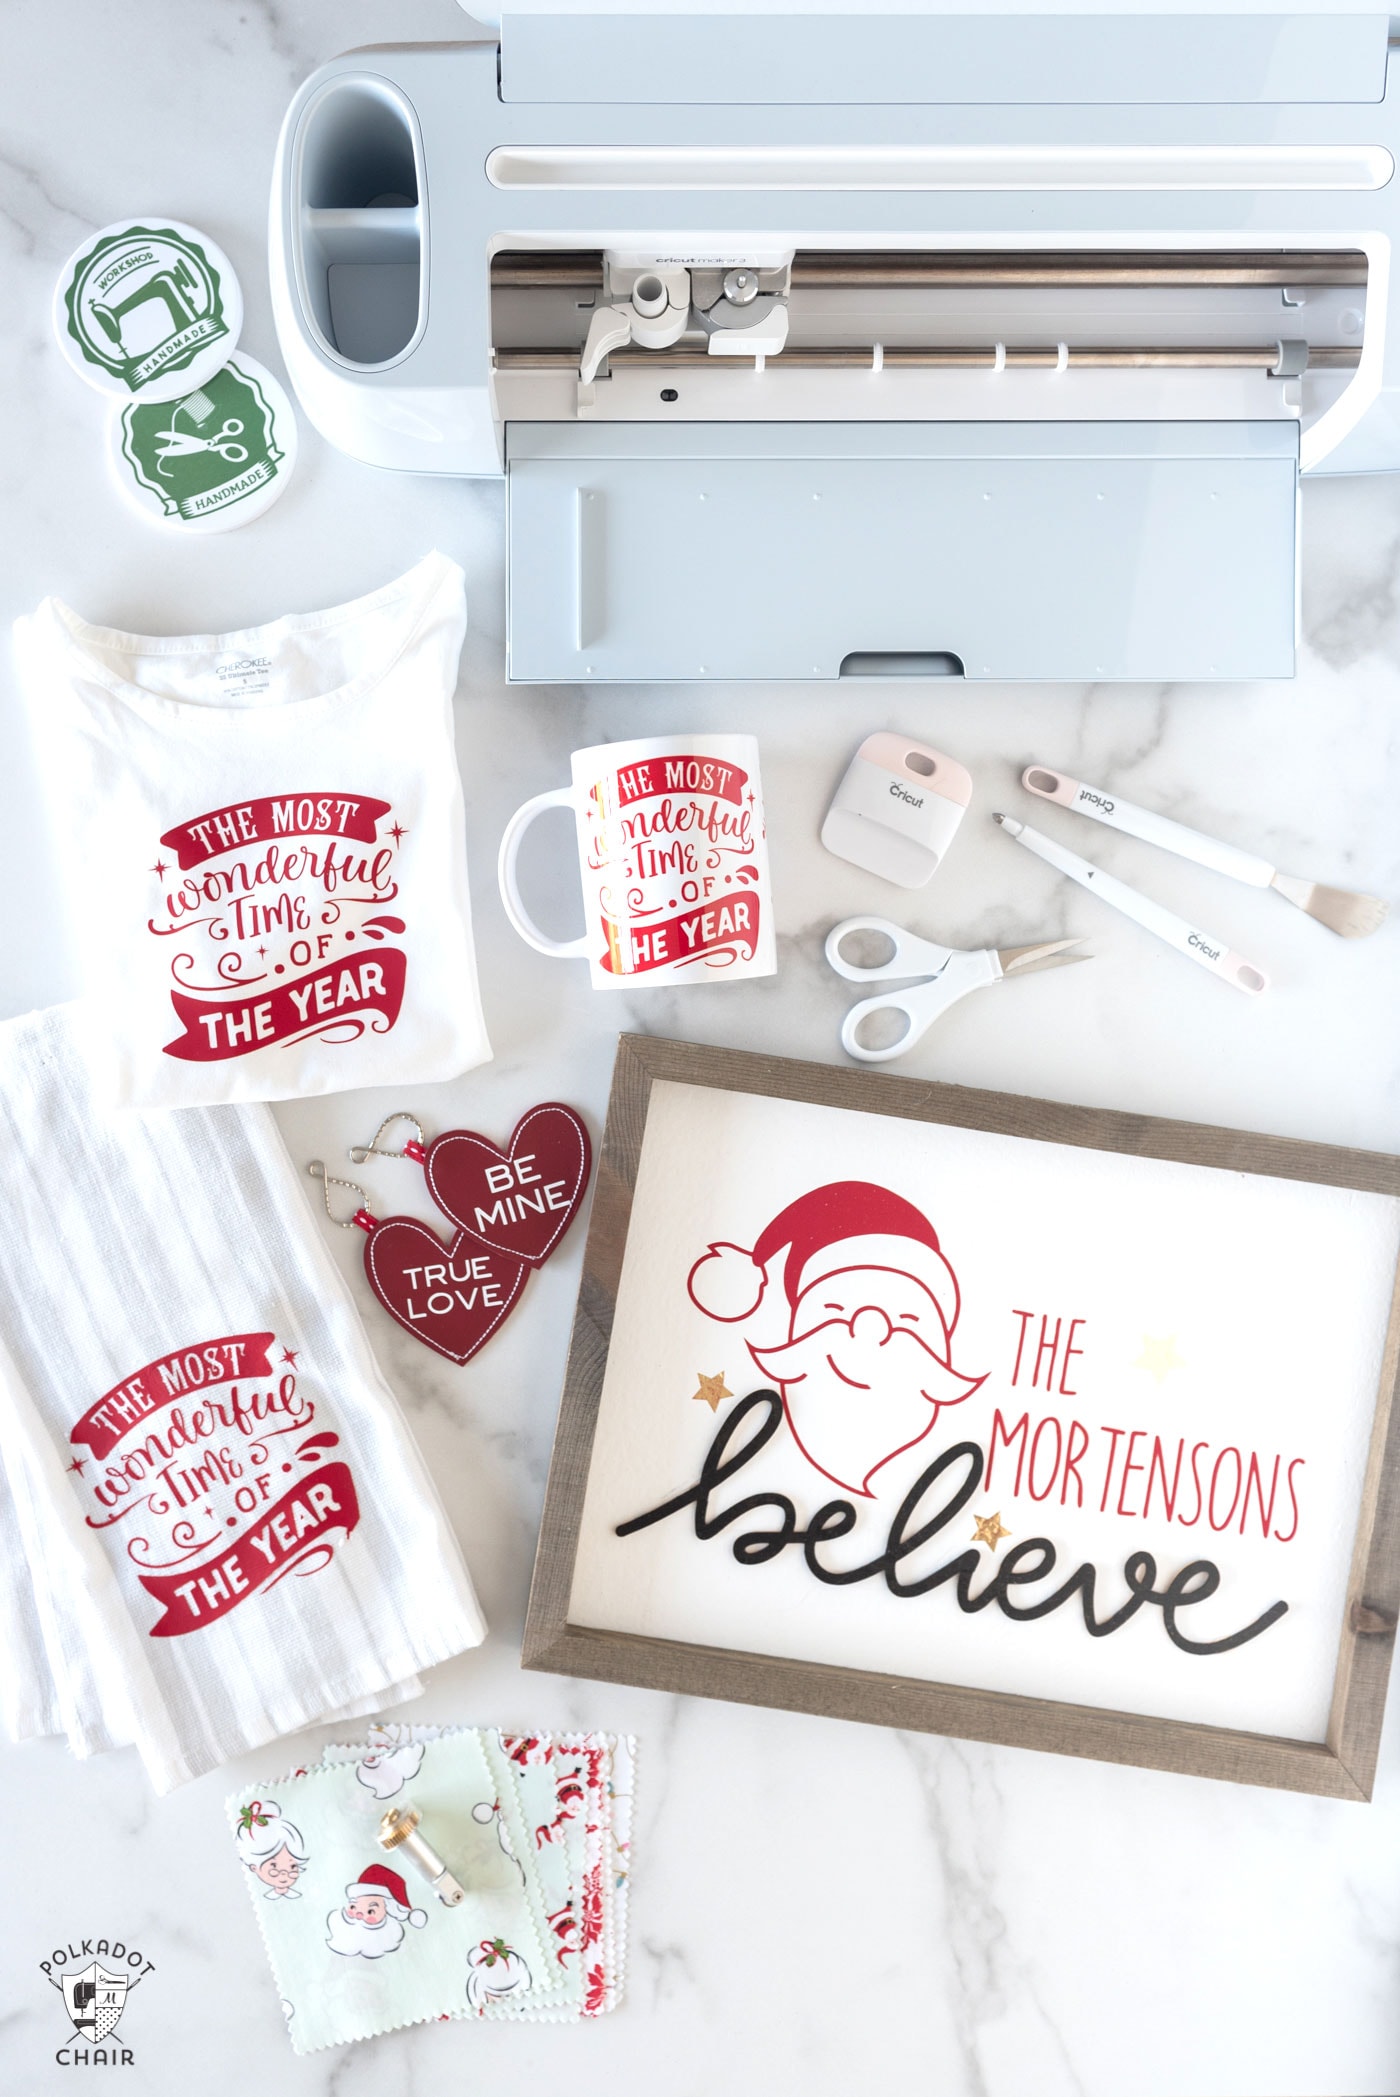 Which Cricut machine is right for me? - Cricut UK Blog